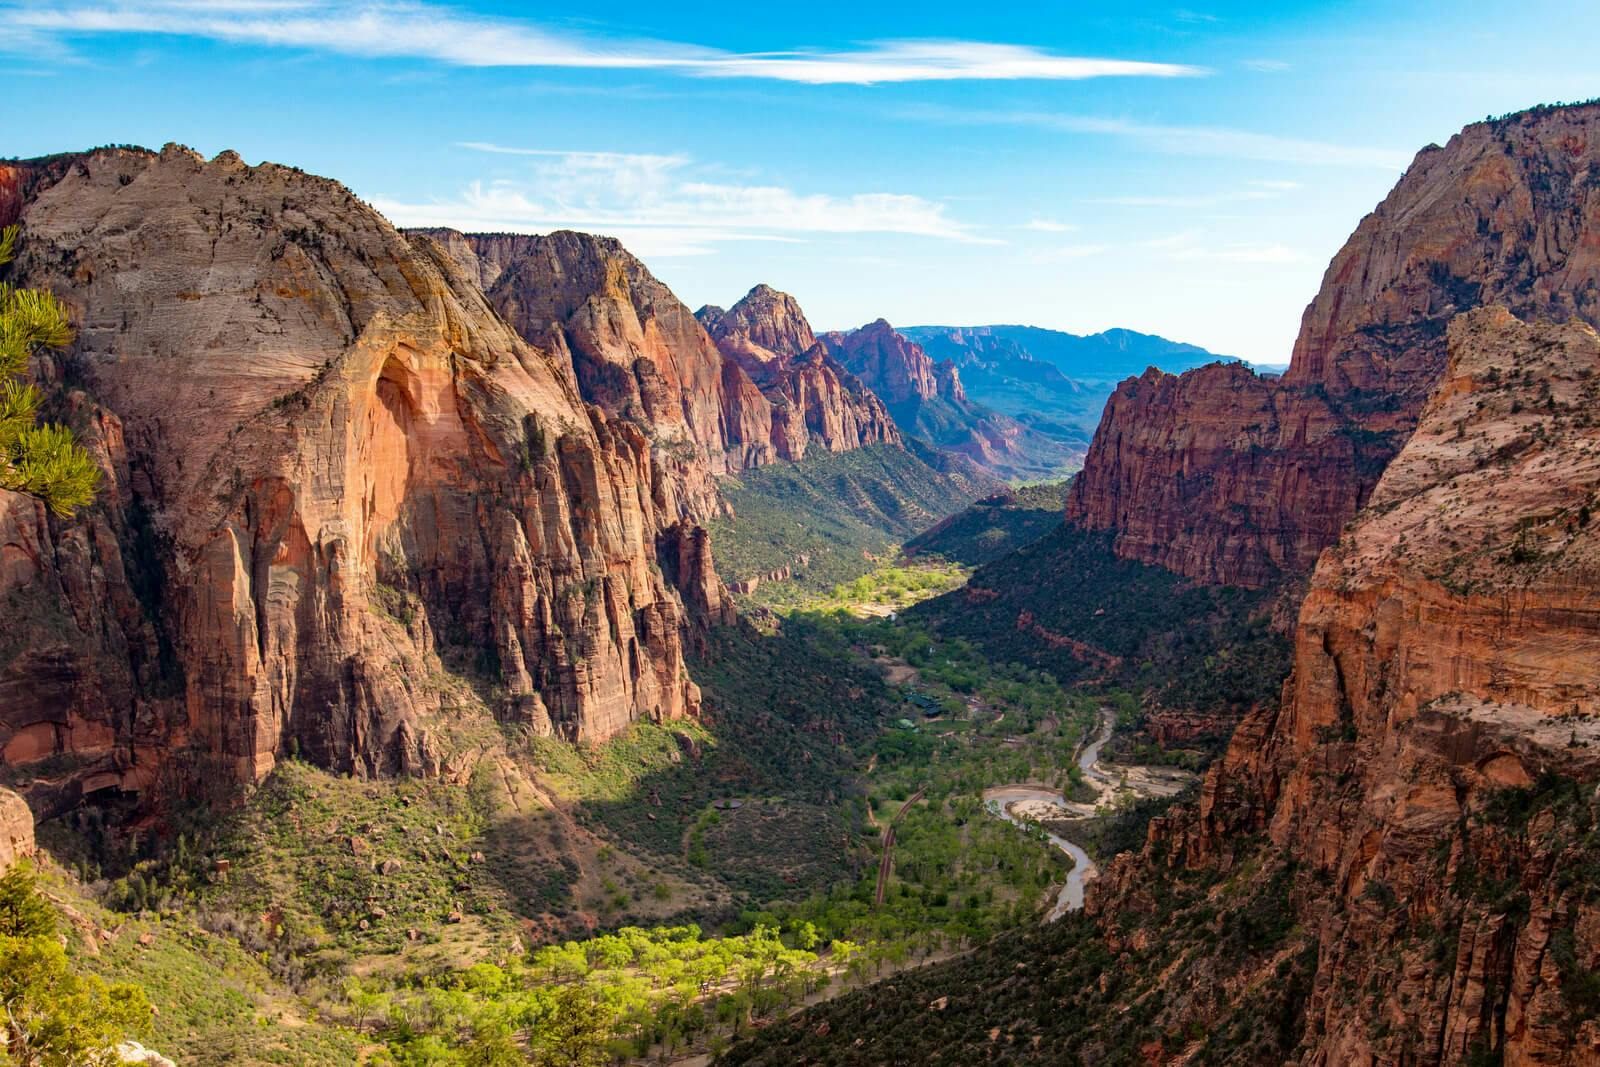 Captivating beauty of Zion Canyon, a natural wonder nestled in Utah's majestic landscapes"